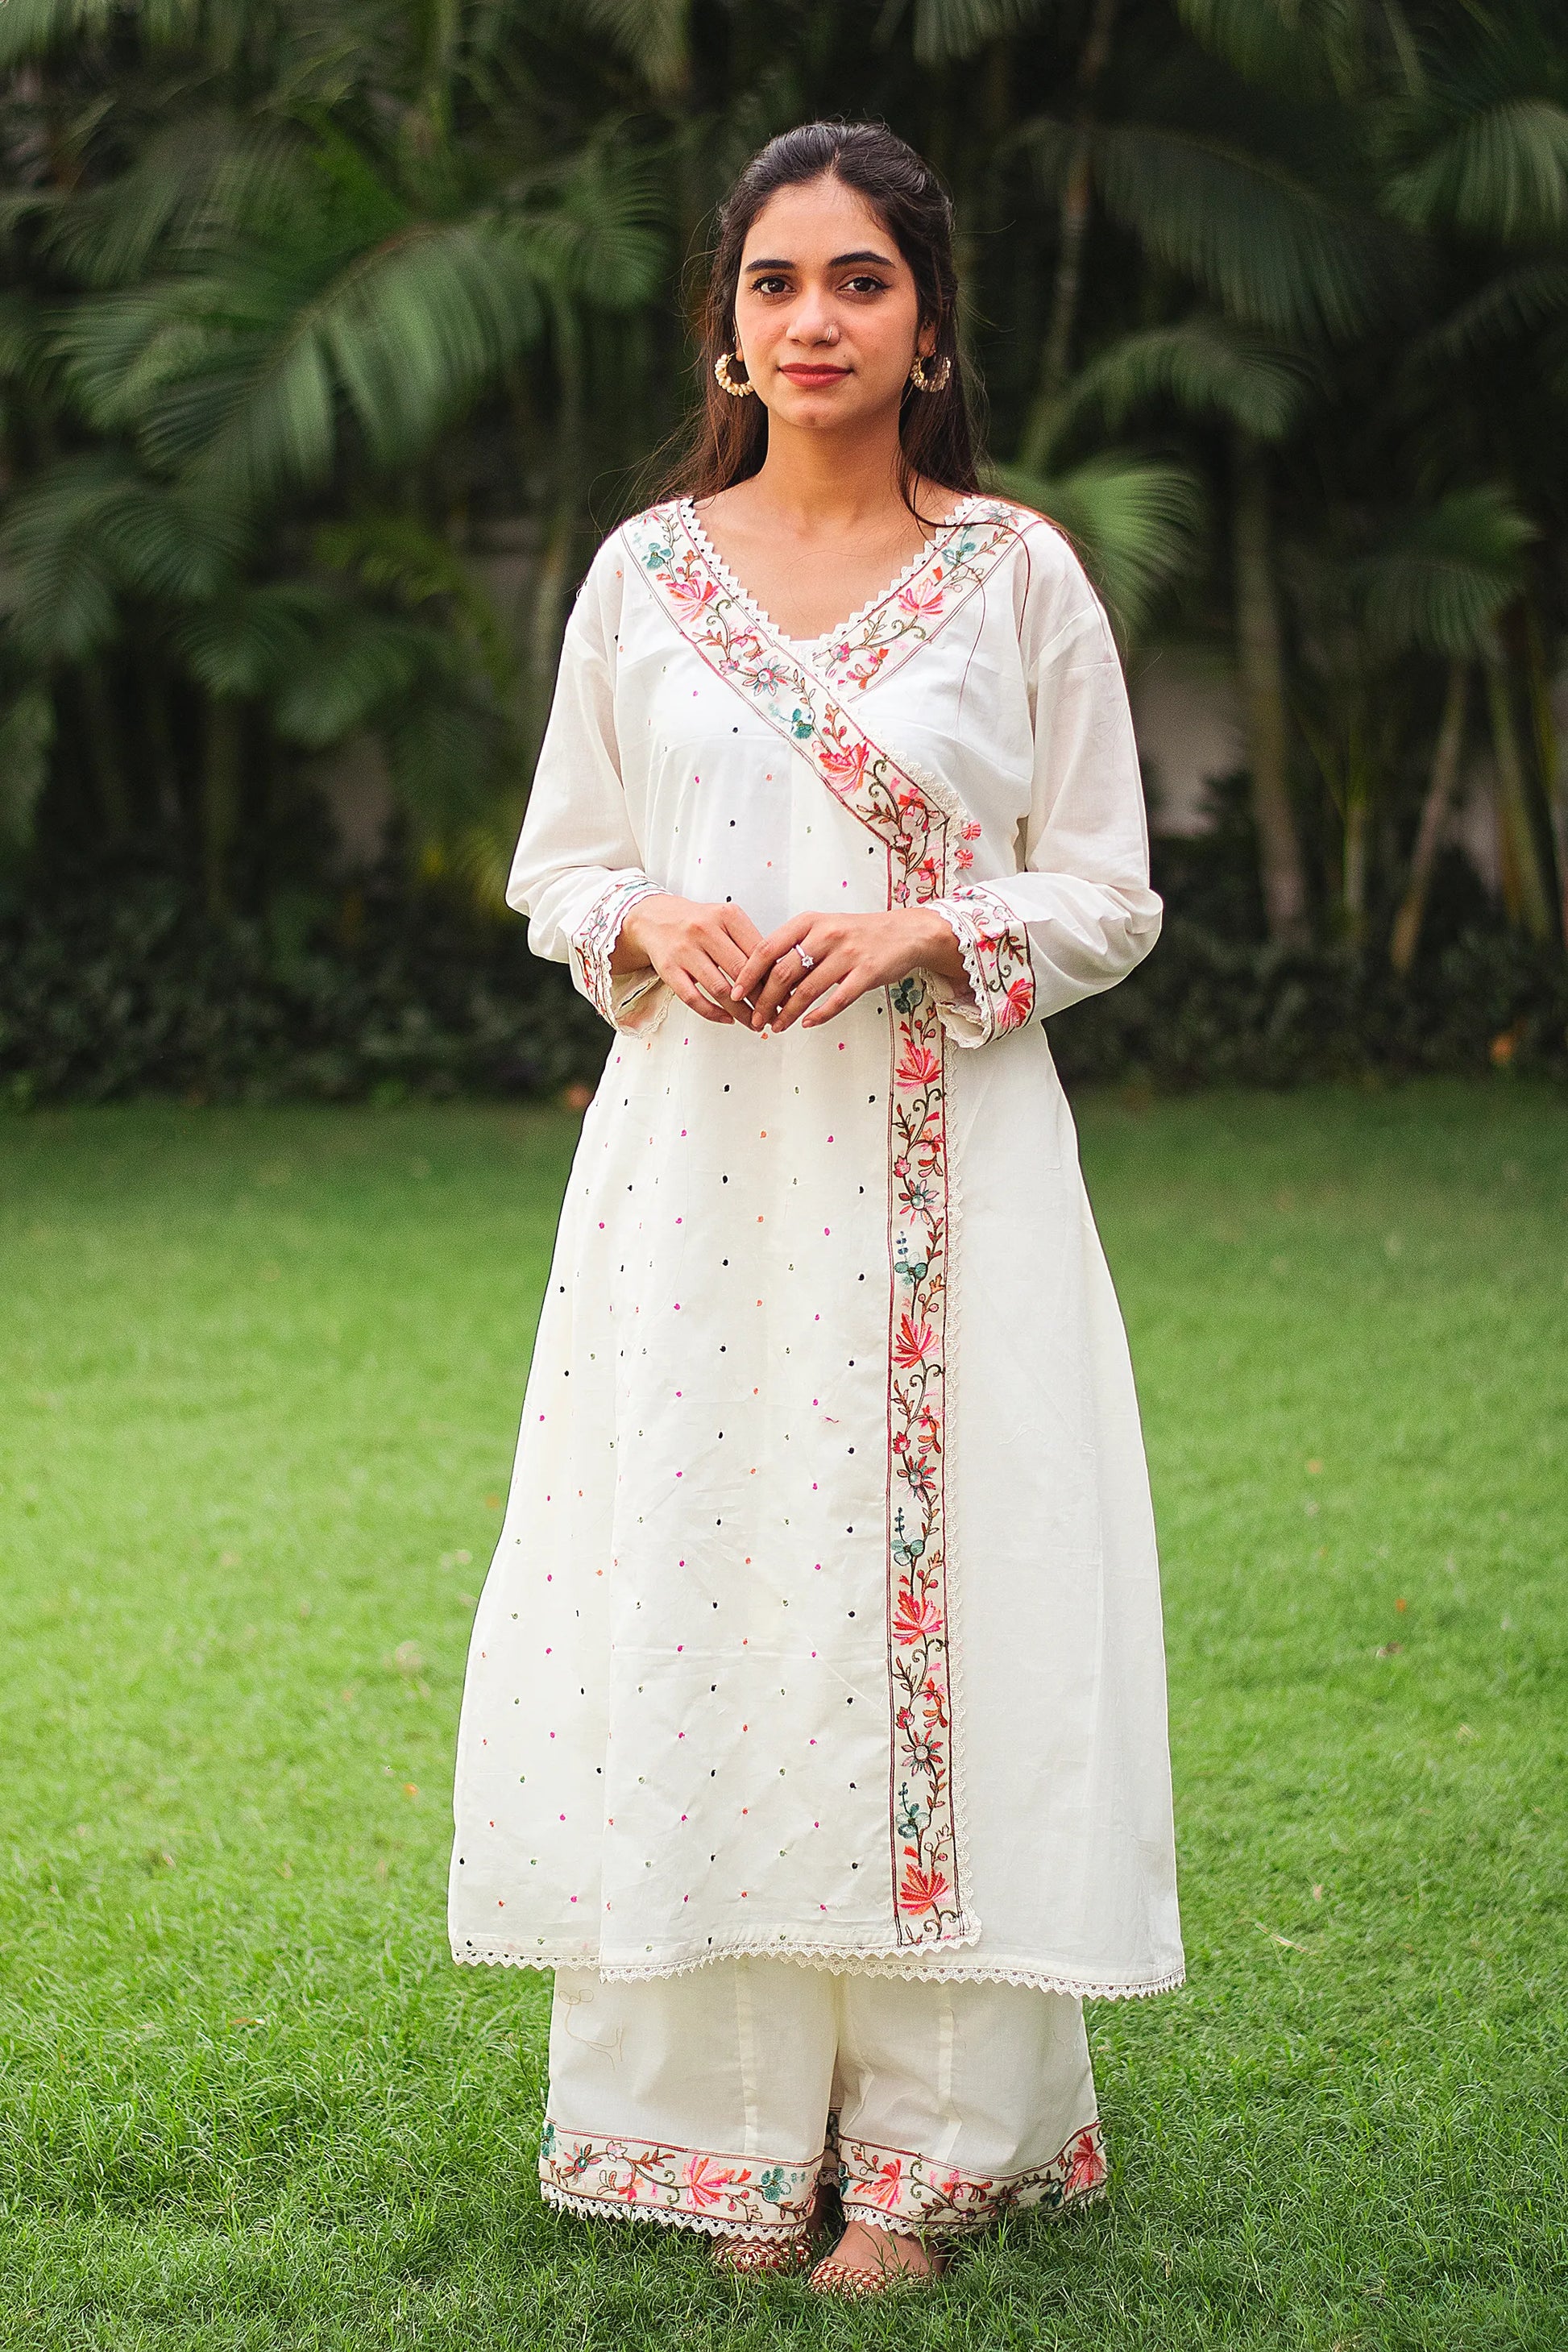 An Indian Girl wearing off-white colored Angarkha dress